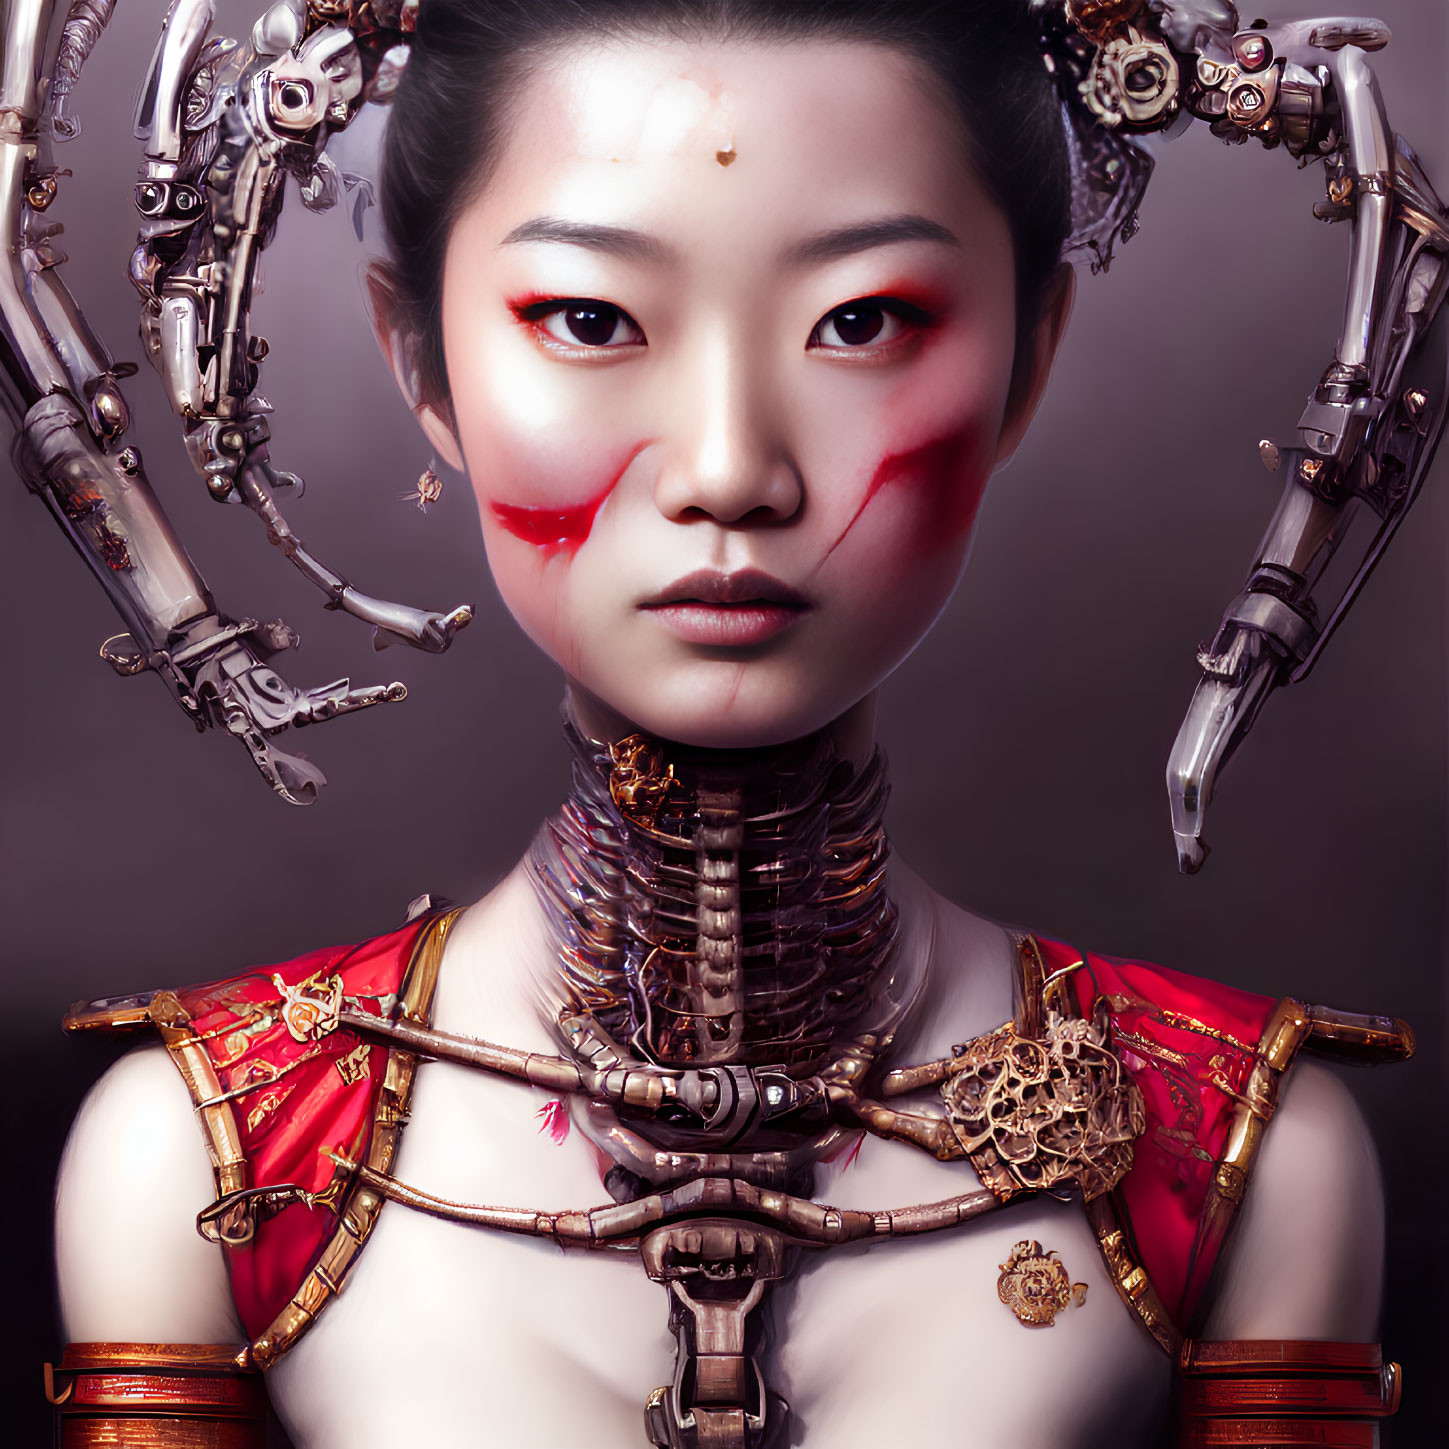 Woman with red war paint and cybernetic neck/shoulder apparatus.